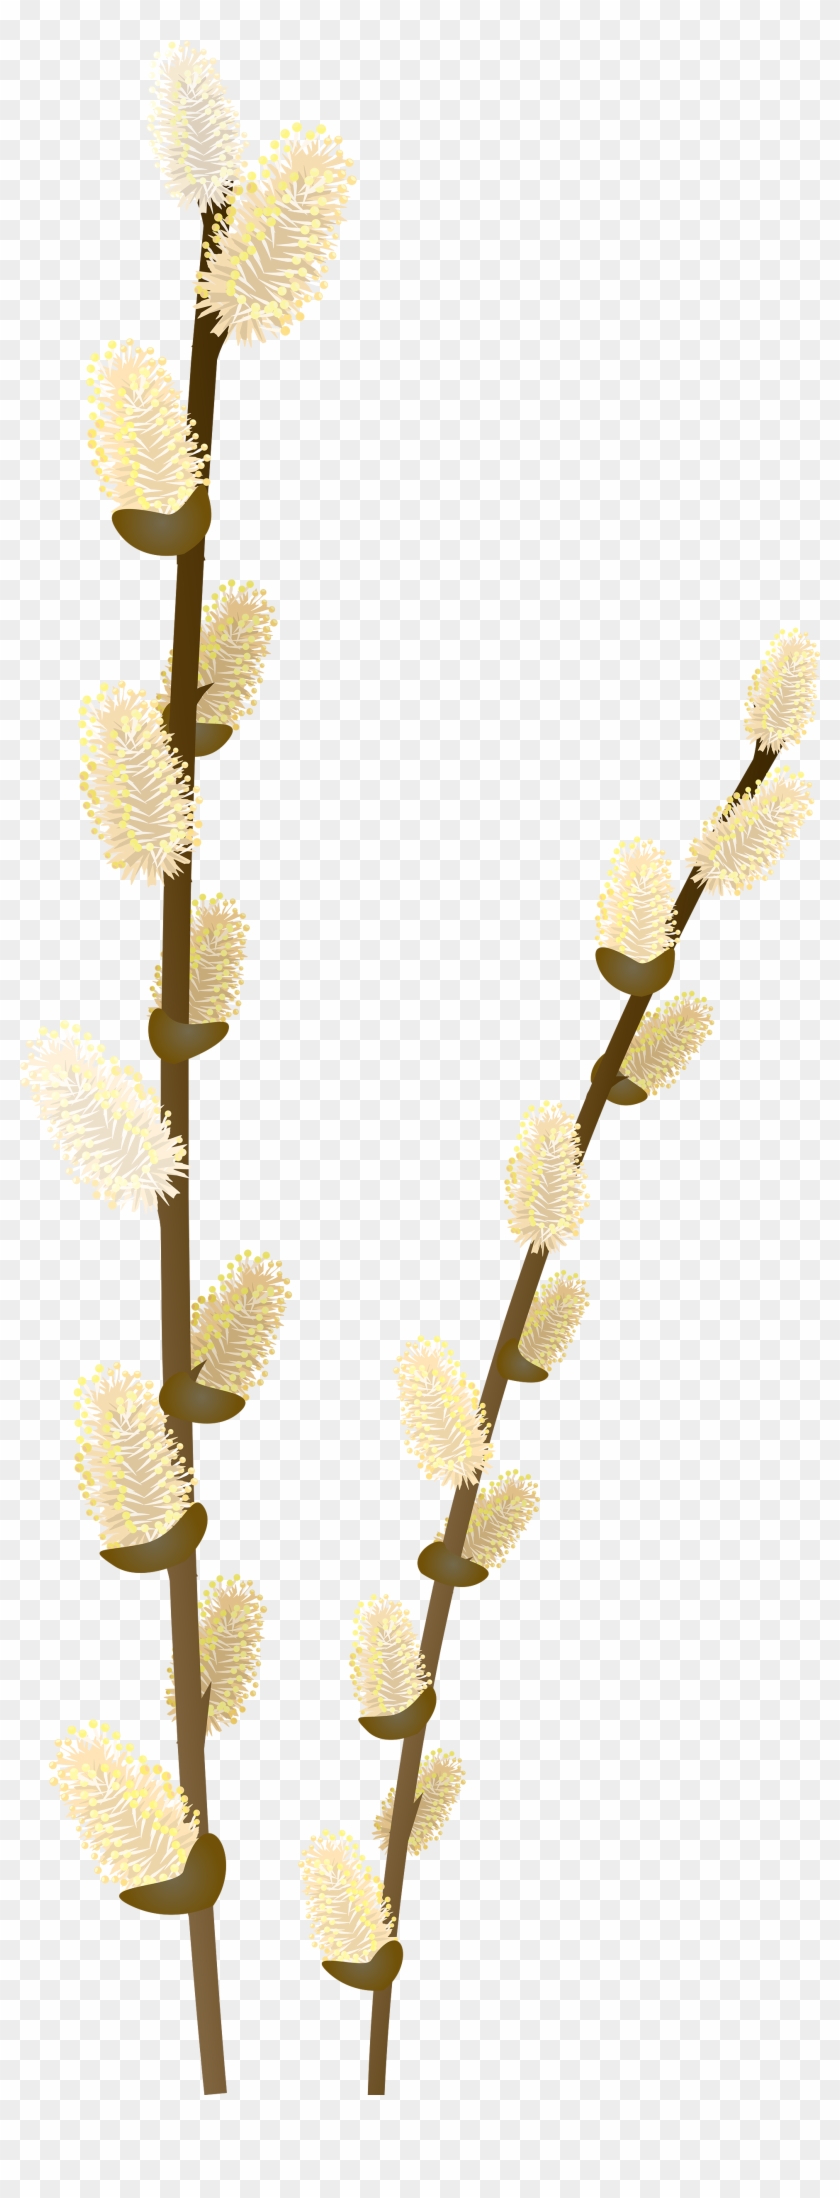 Willow Tree Branch Transparent Png Clip Art Image - Willow #1333877